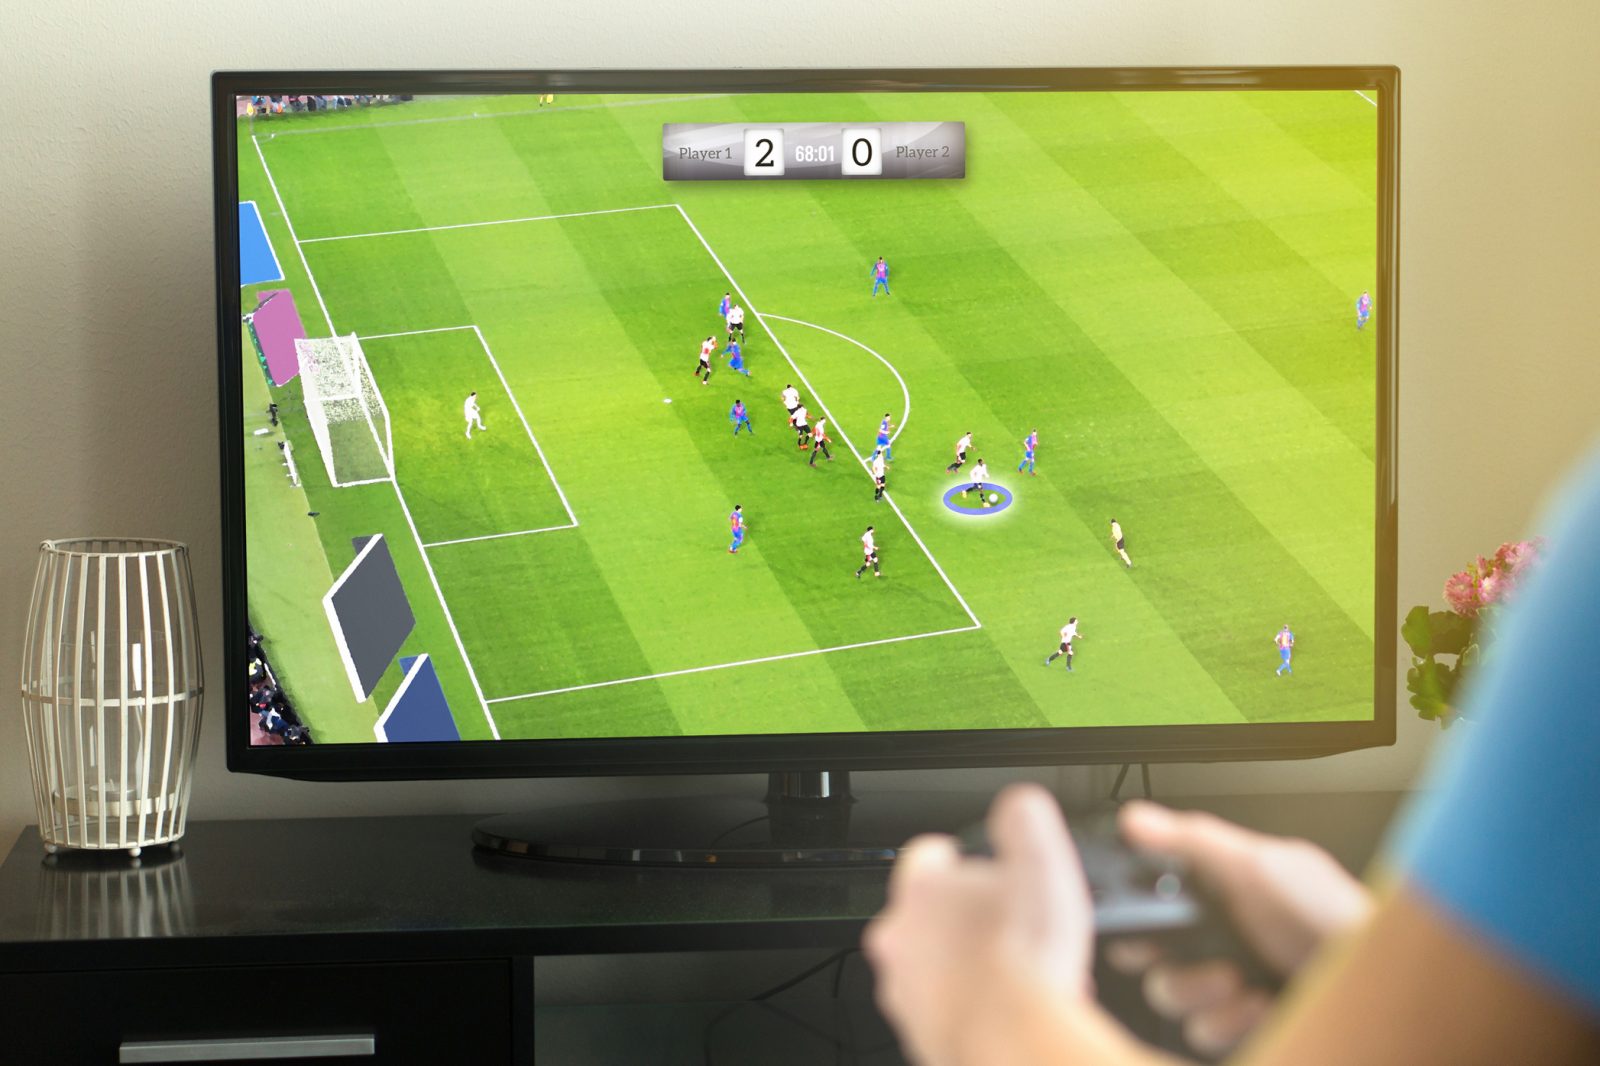 A tv screen displays virtual soccer players in the midst of a soccer game.